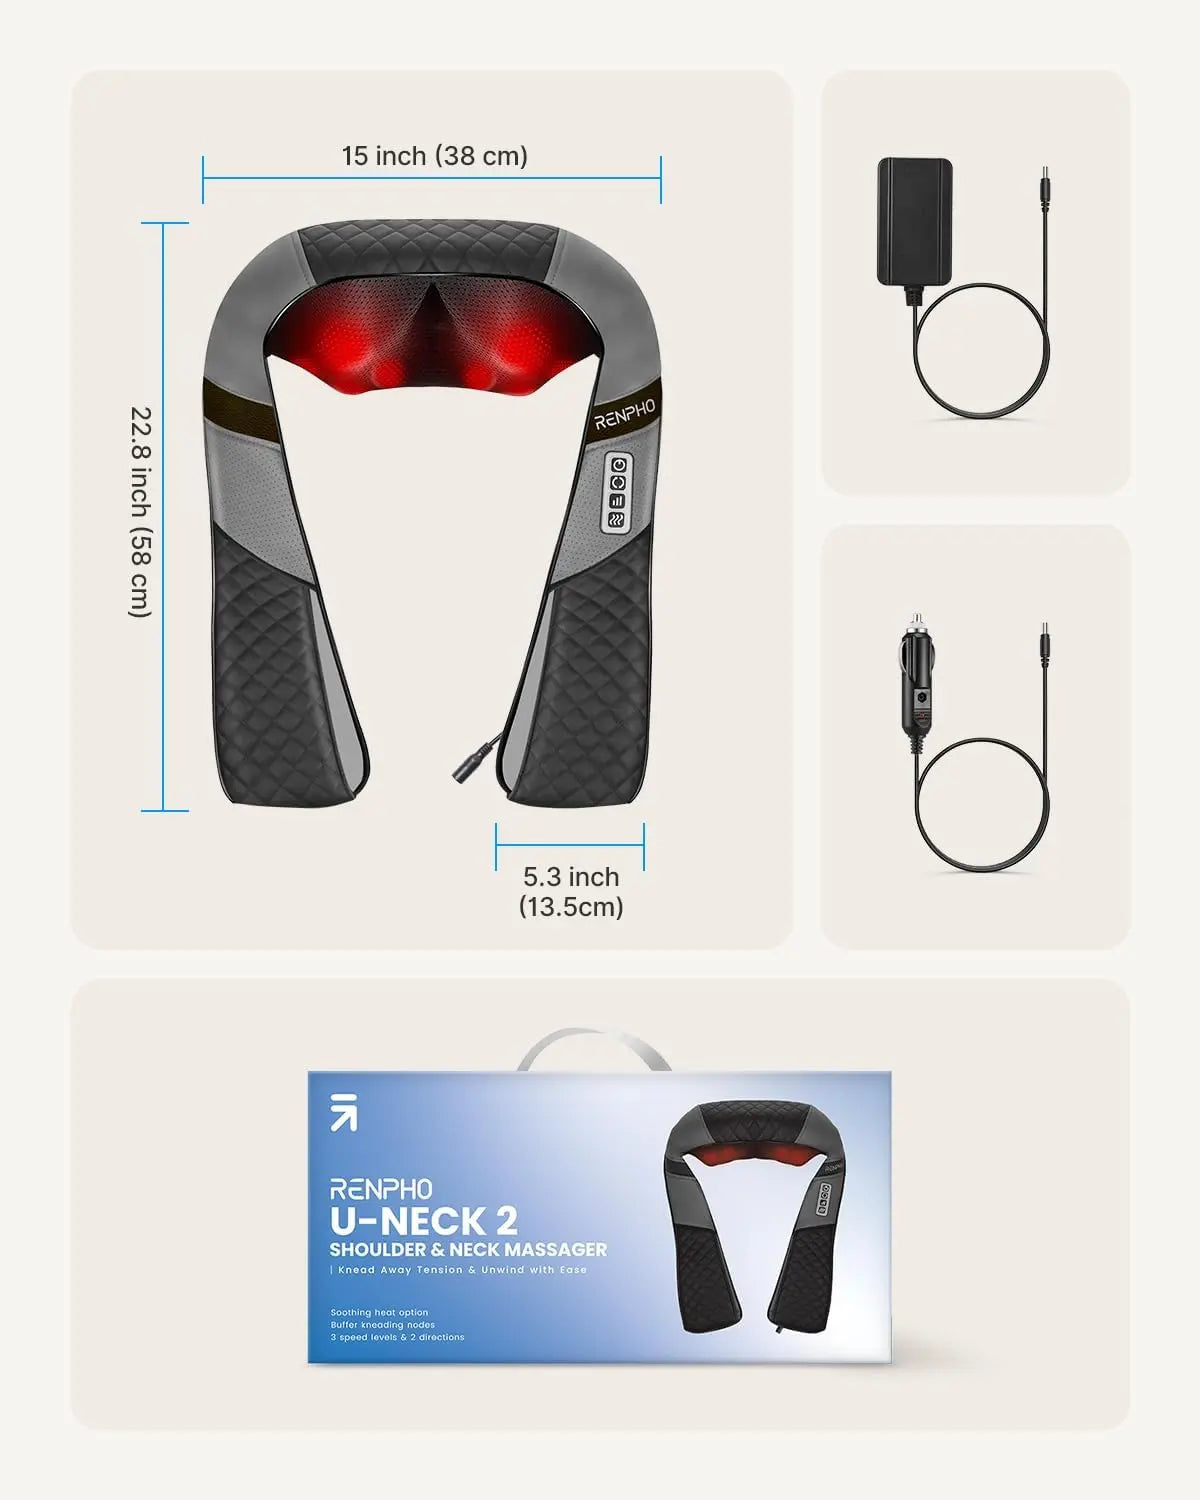 An image of a Renpho EU U-Neck 2 Neck & Shoulders Massager. It displays the device dimensions (15 x 22.8 x 5.3 inches) and includes two smaller pictures of the power adapter and car charger. The lower part shows the product box with an image of the massager, highlighting its multiple speeds and built-in heating features, along with the Renpho EU logo.